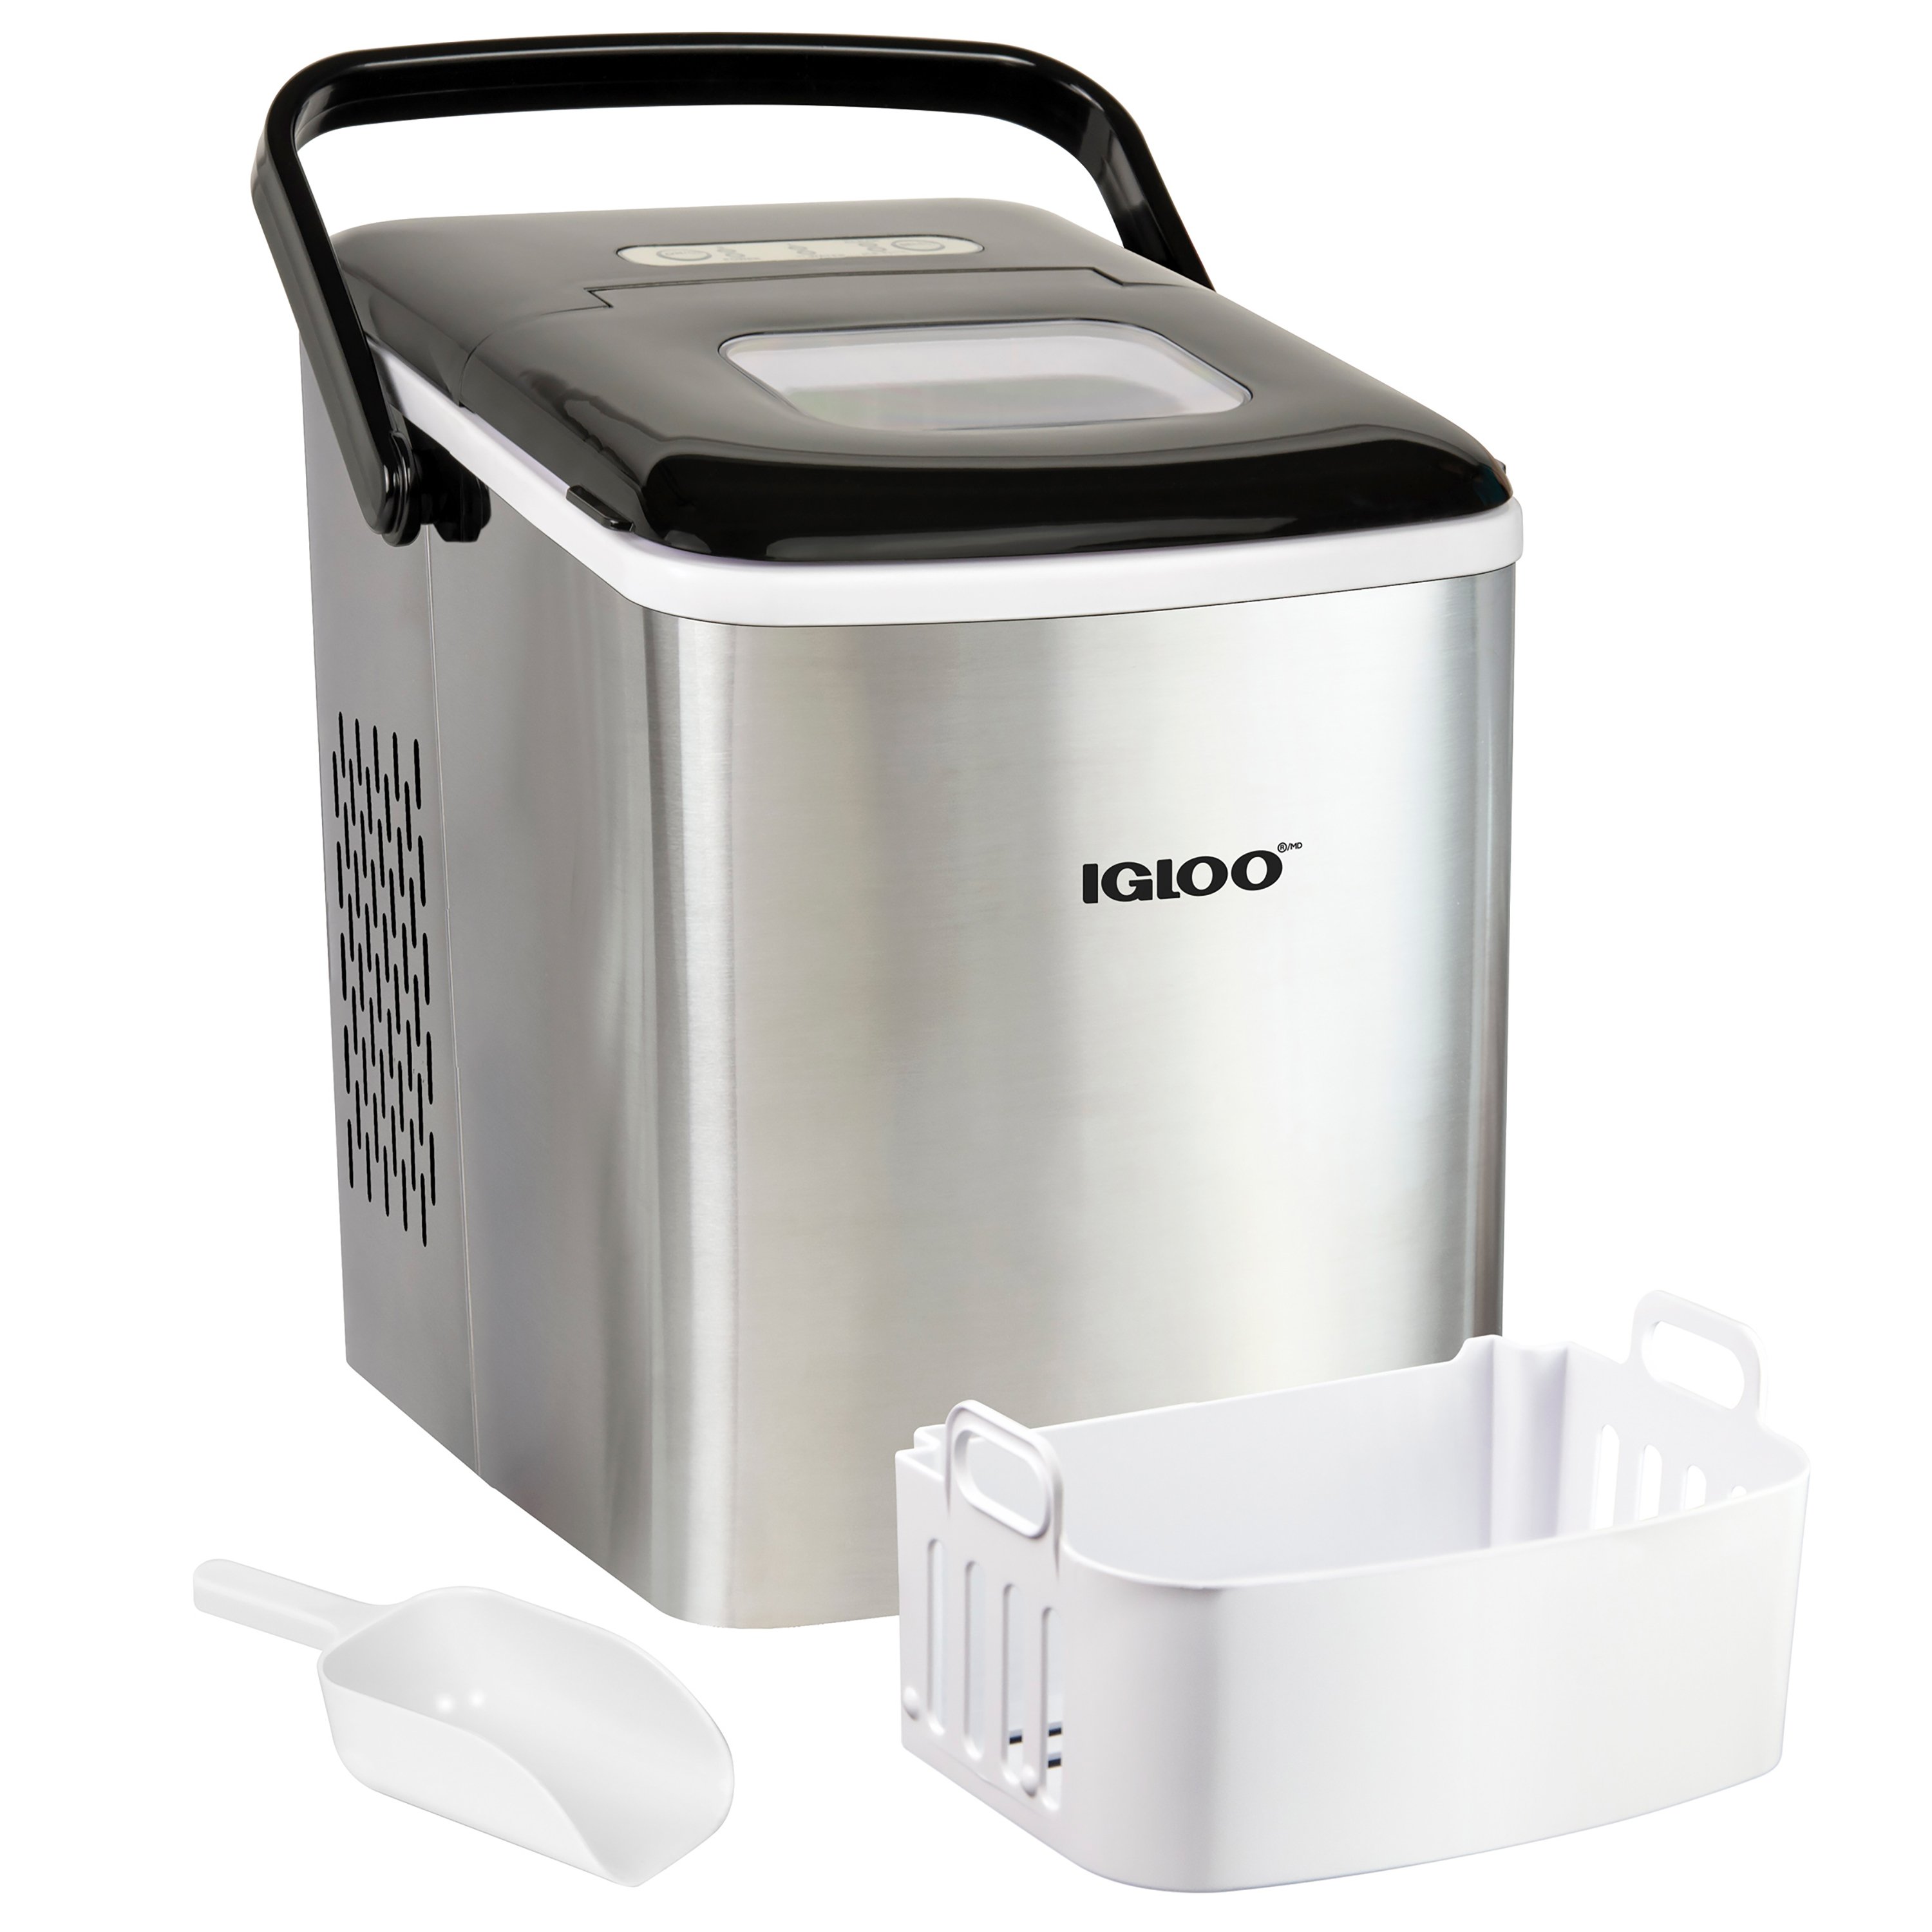 6 Reasons To Get a Portable Ice Maker - Professional Series